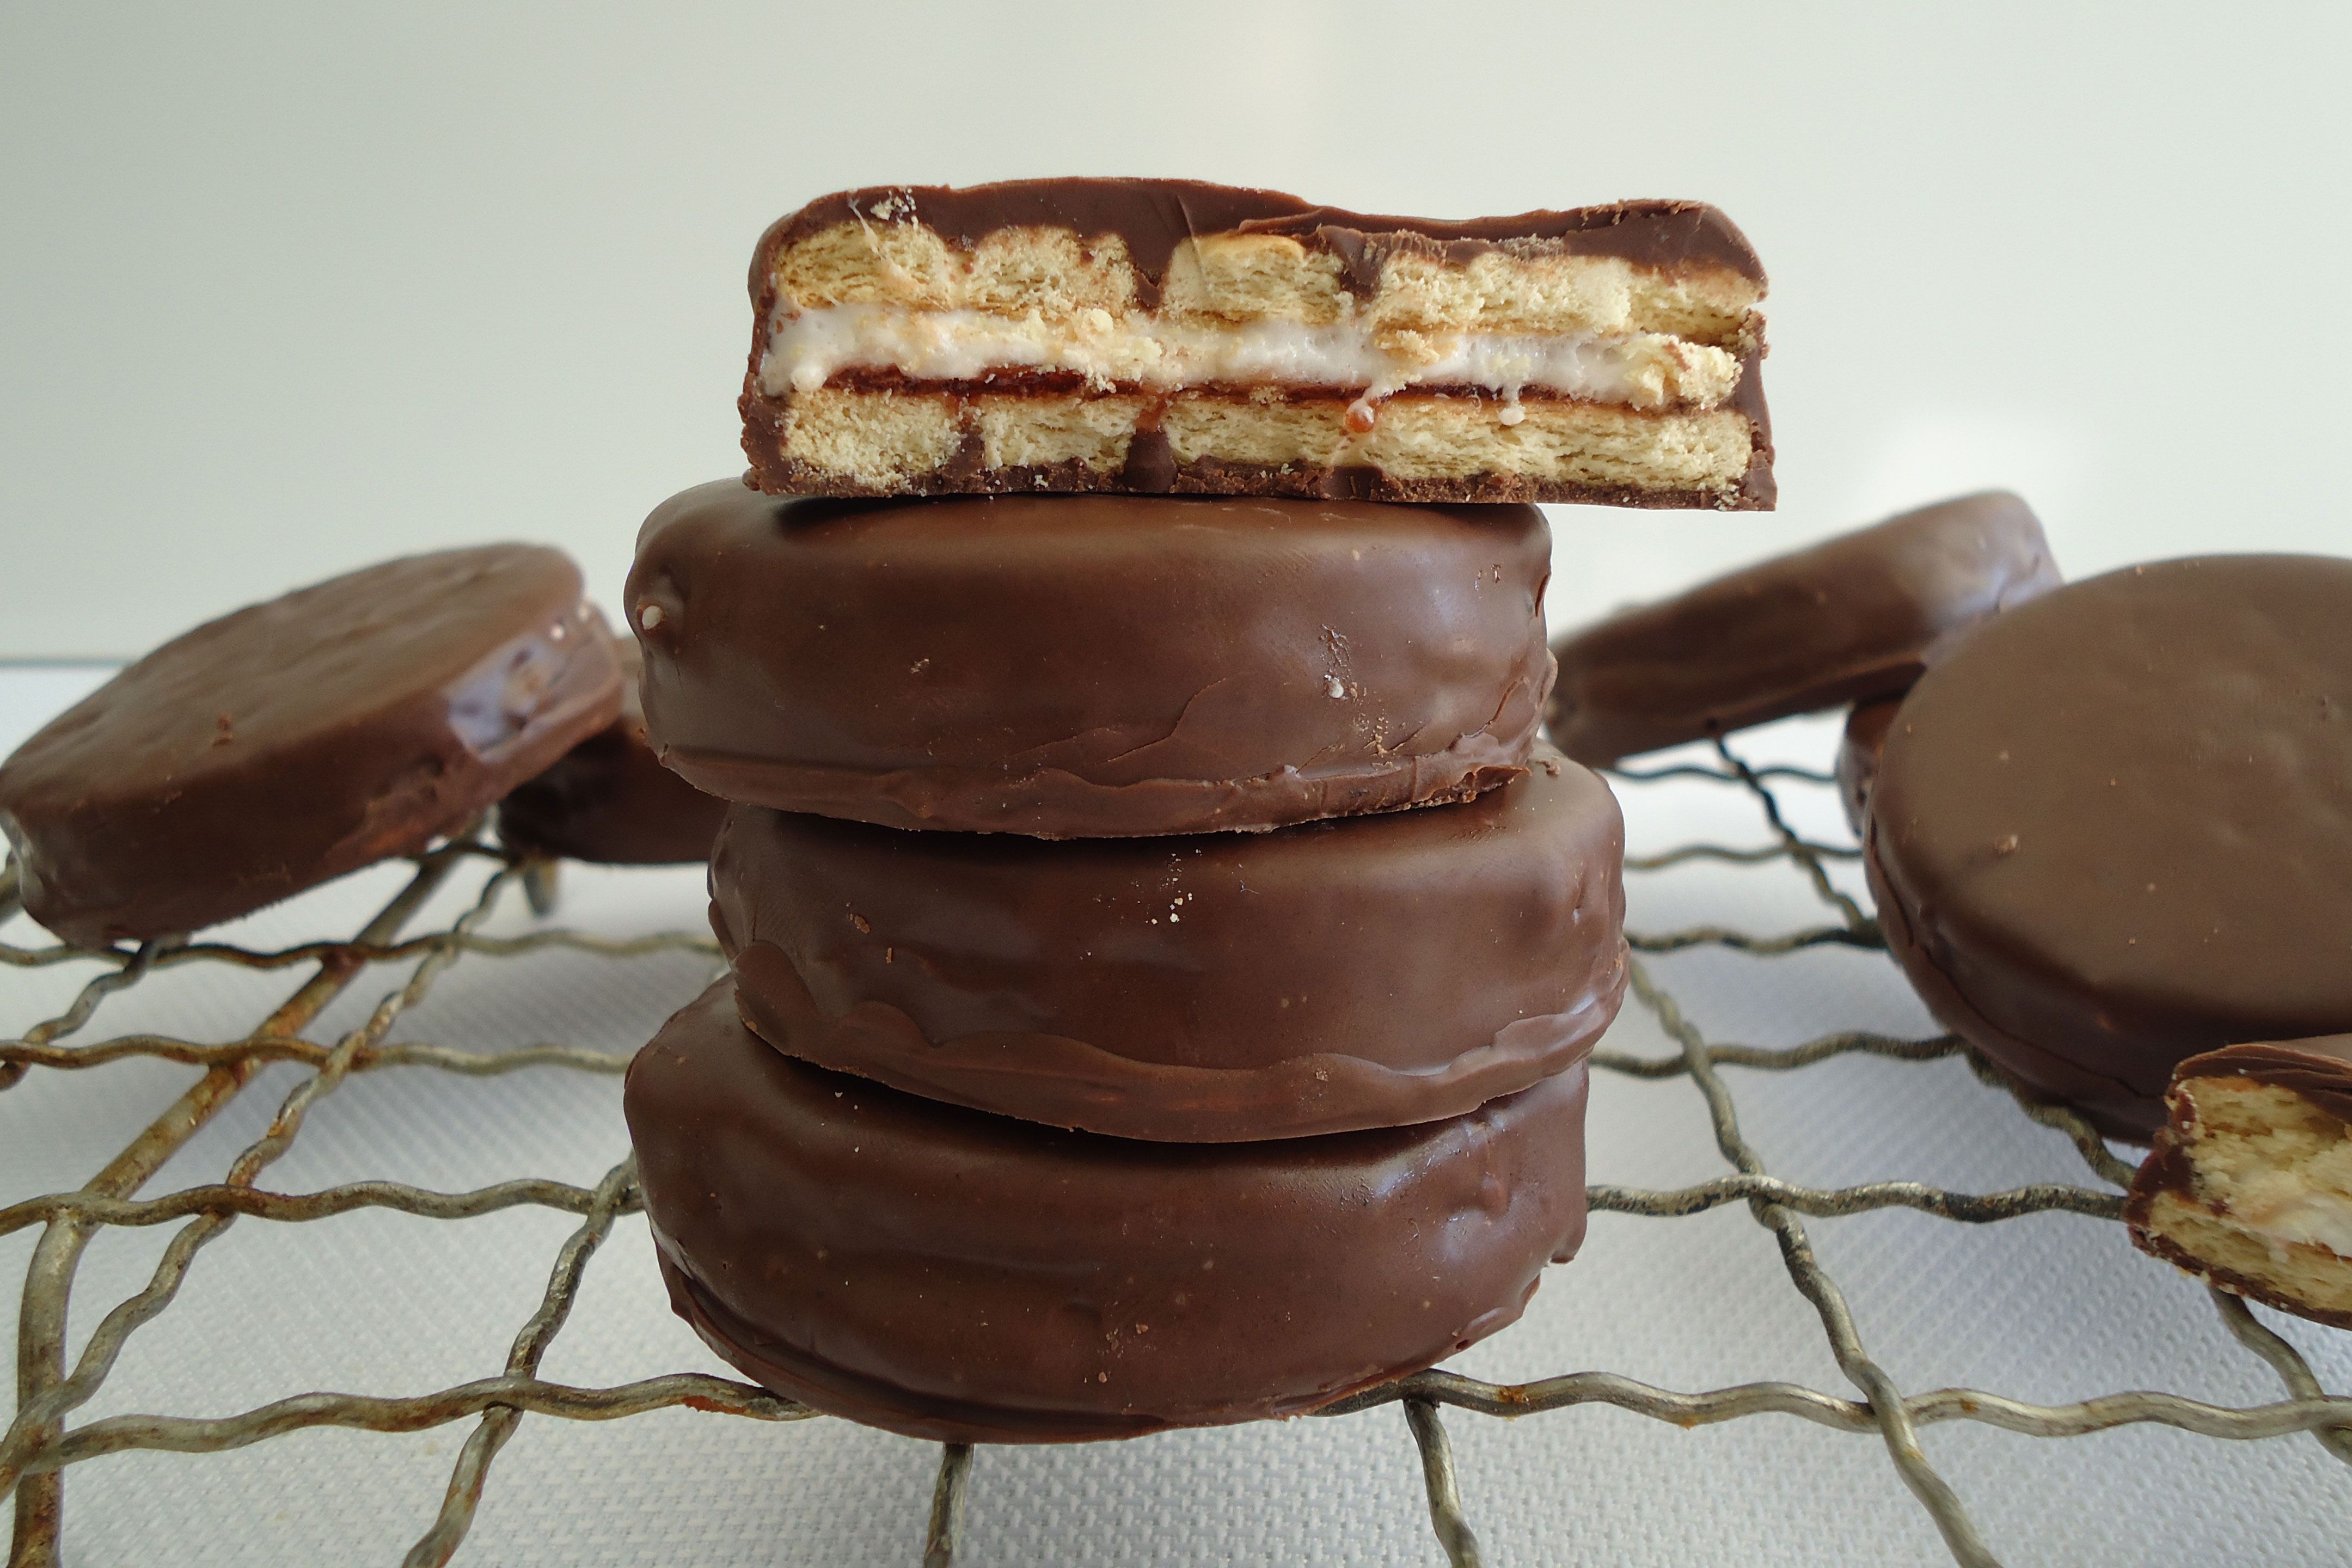 How to make Wagon Wheels from scratch | Australia's Best Recipes